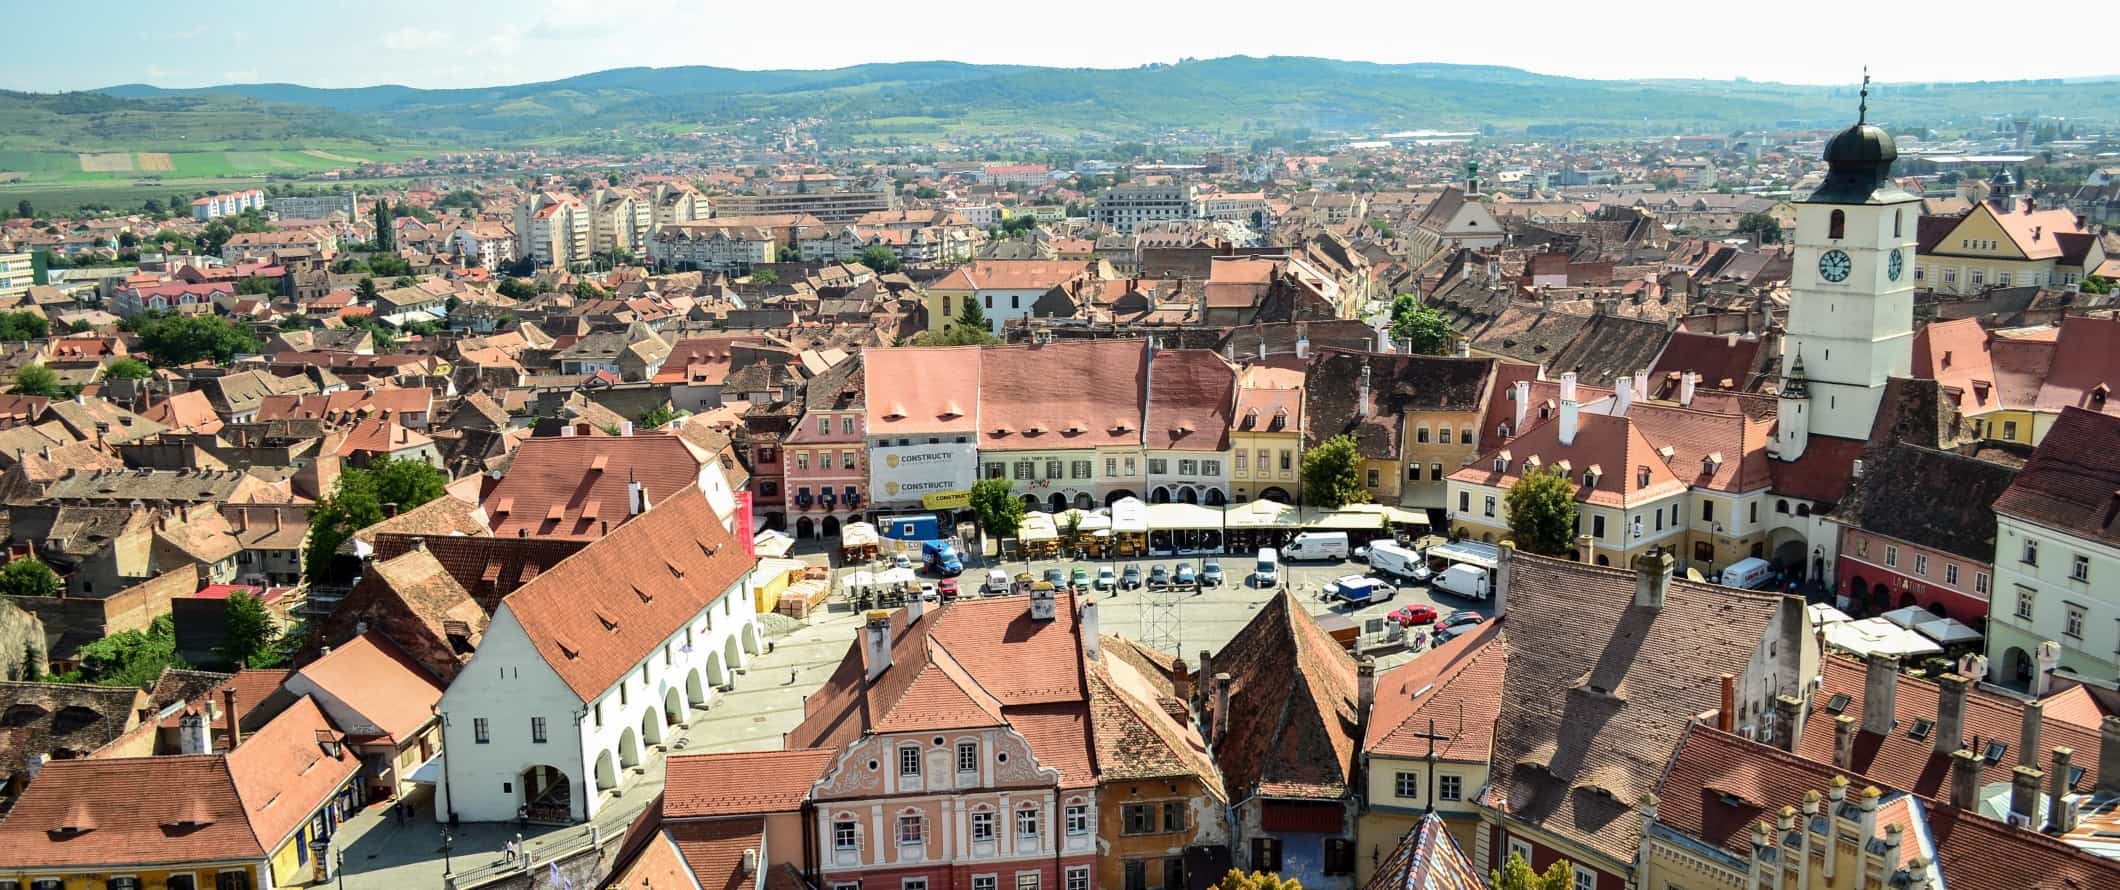 Aerial view of Old Town in Sibiu, Romania